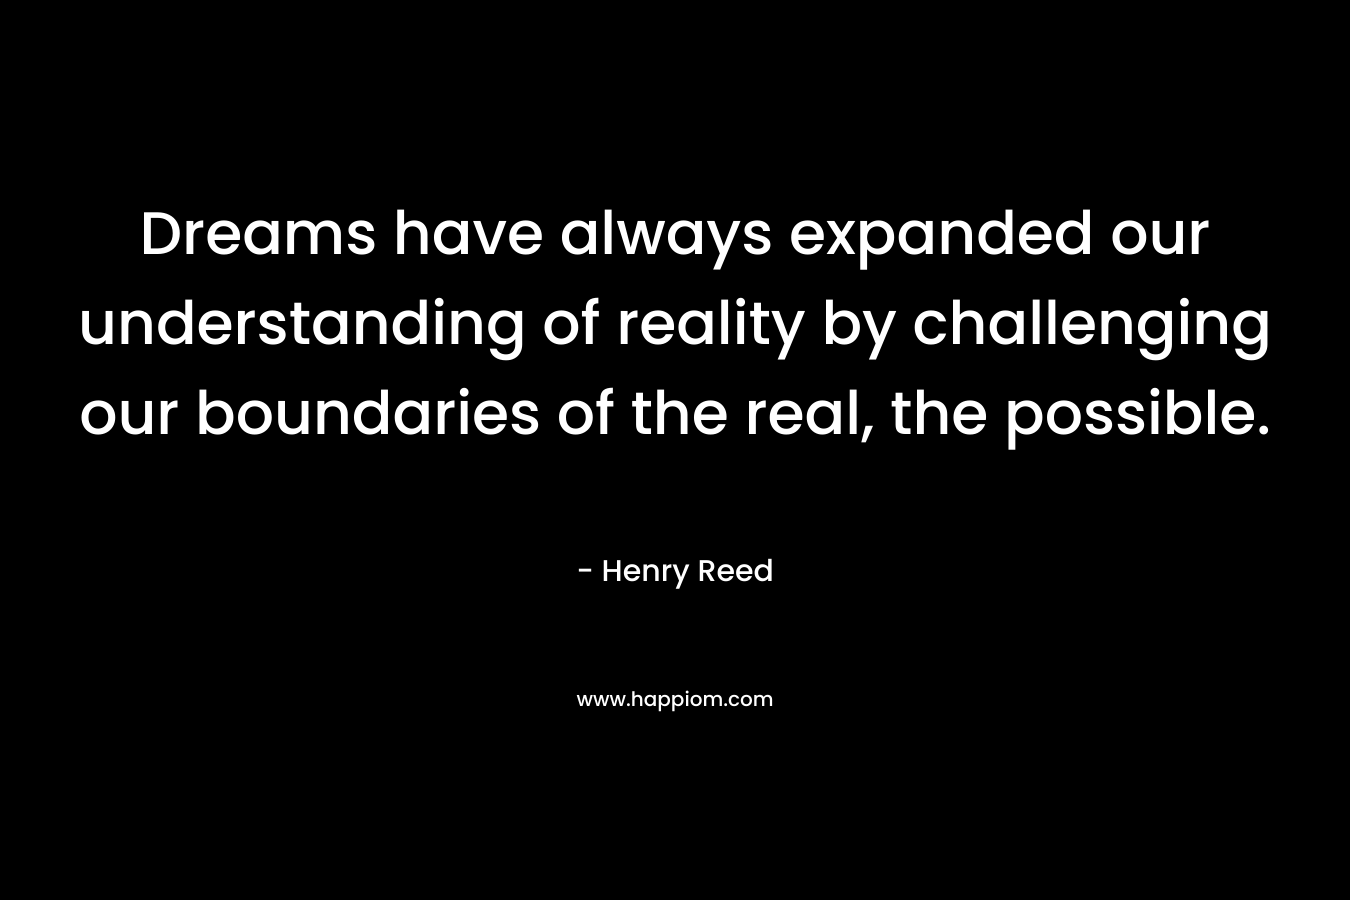 Dreams have always expanded our understanding of reality by challenging our boundaries of the real, the possible. – Henry Reed